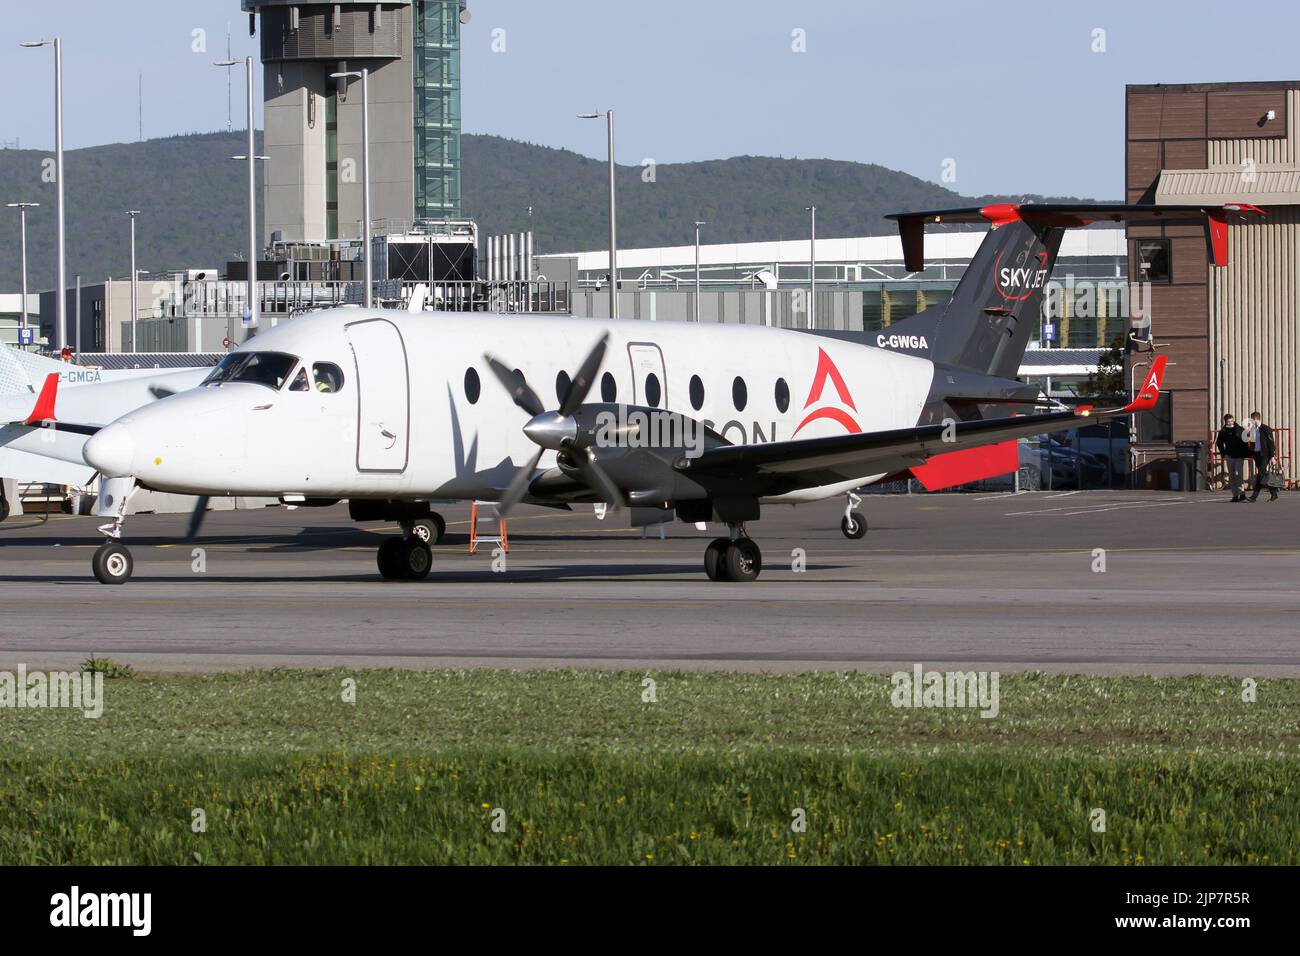 A Skyjet Aviation (Air Liaison) Beechcraft 1900D taxiing at Quebec airport. Air Liaison is a regional airline based in Quebec City, Quebec with its base at Québec City Jean Lesage International Airport. It operates scheduled flights to 16 domestic destinations from Monday to Friday.The Beechcraft 1900 is a 19-passenger, pressurized twin-engine turboprop fixed-wing aircraft that was manufactured by Beechcraft. It was designed and is primarily used, as a regional airliner. It is also used as a freight aircraft and corporate transport. Stock Photo